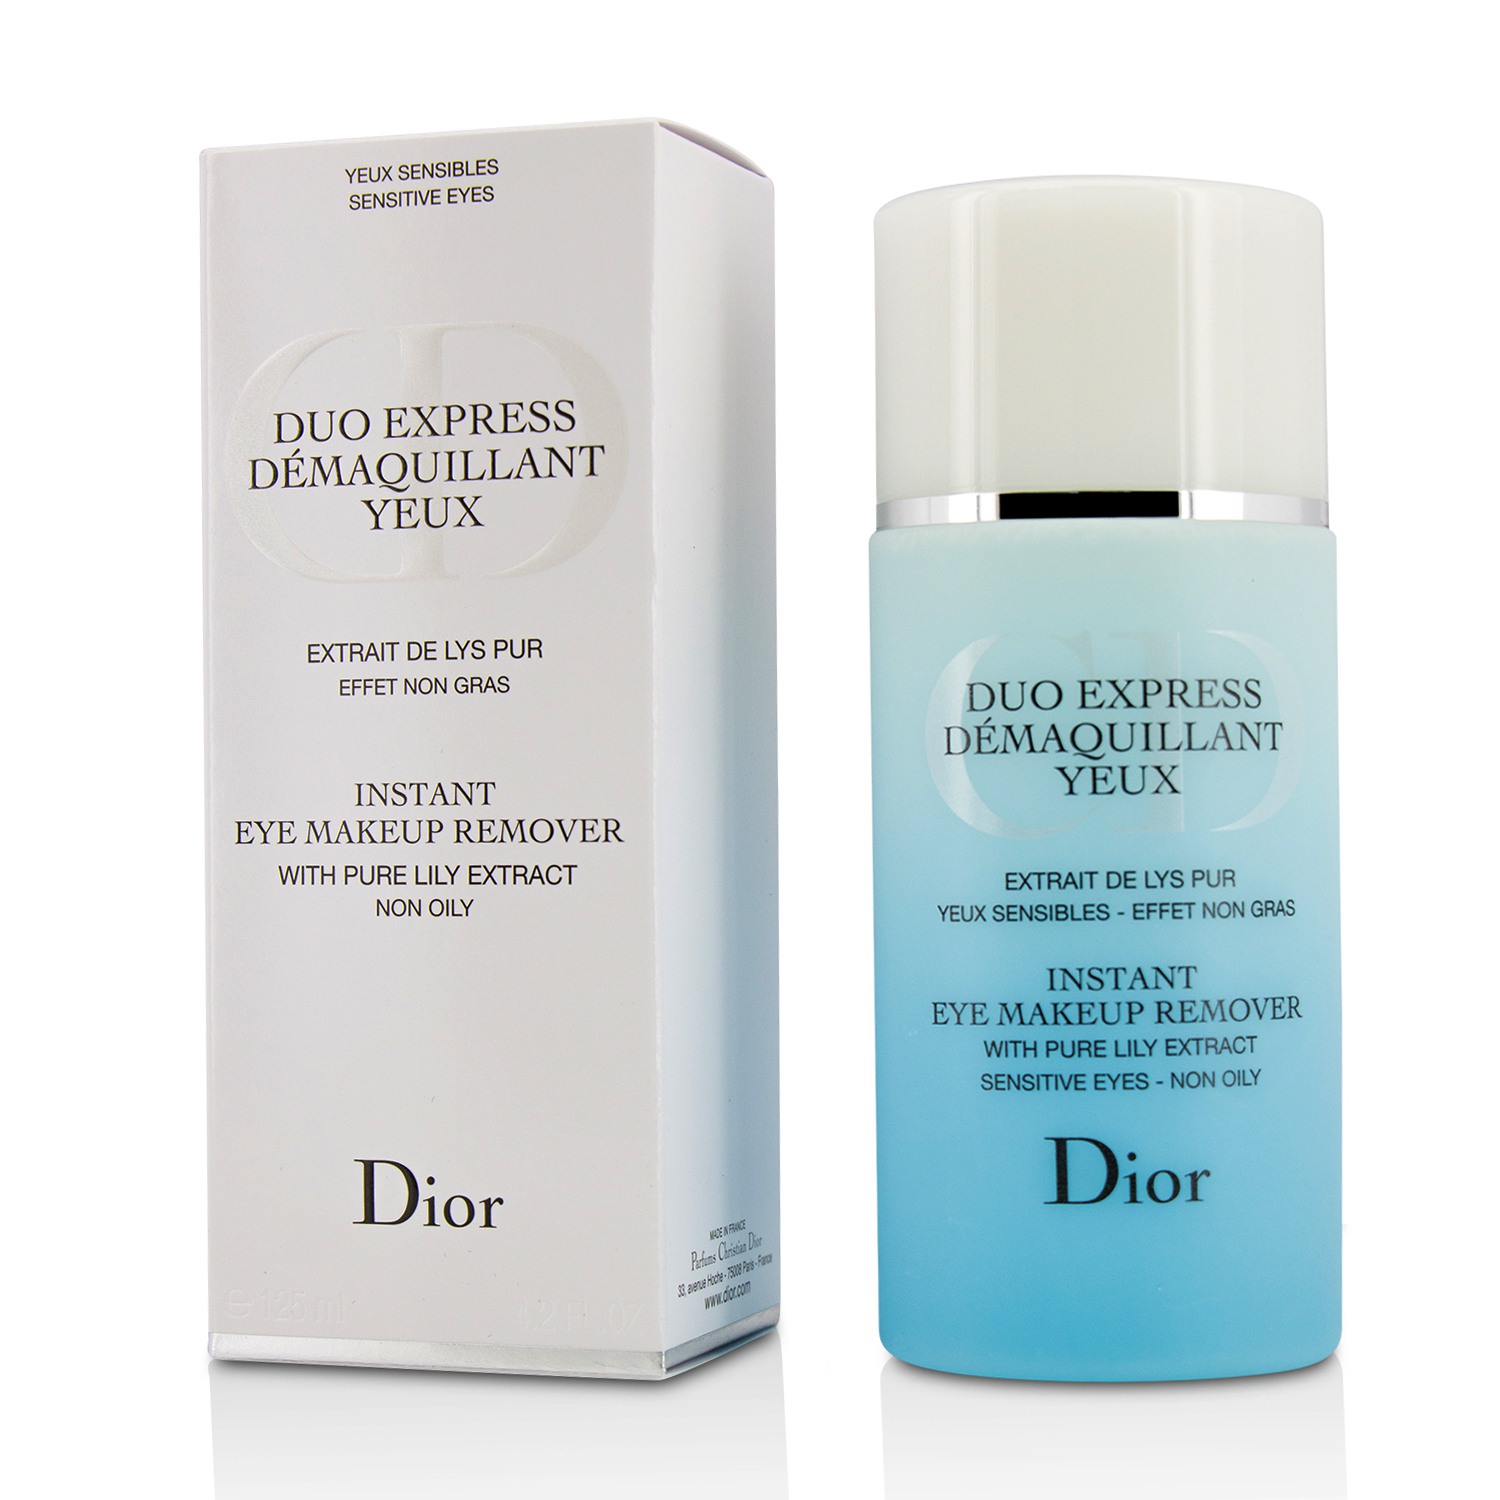 Duo Express Instant Eye Makeup Remover (Without Cellophane) Christian Dior Image